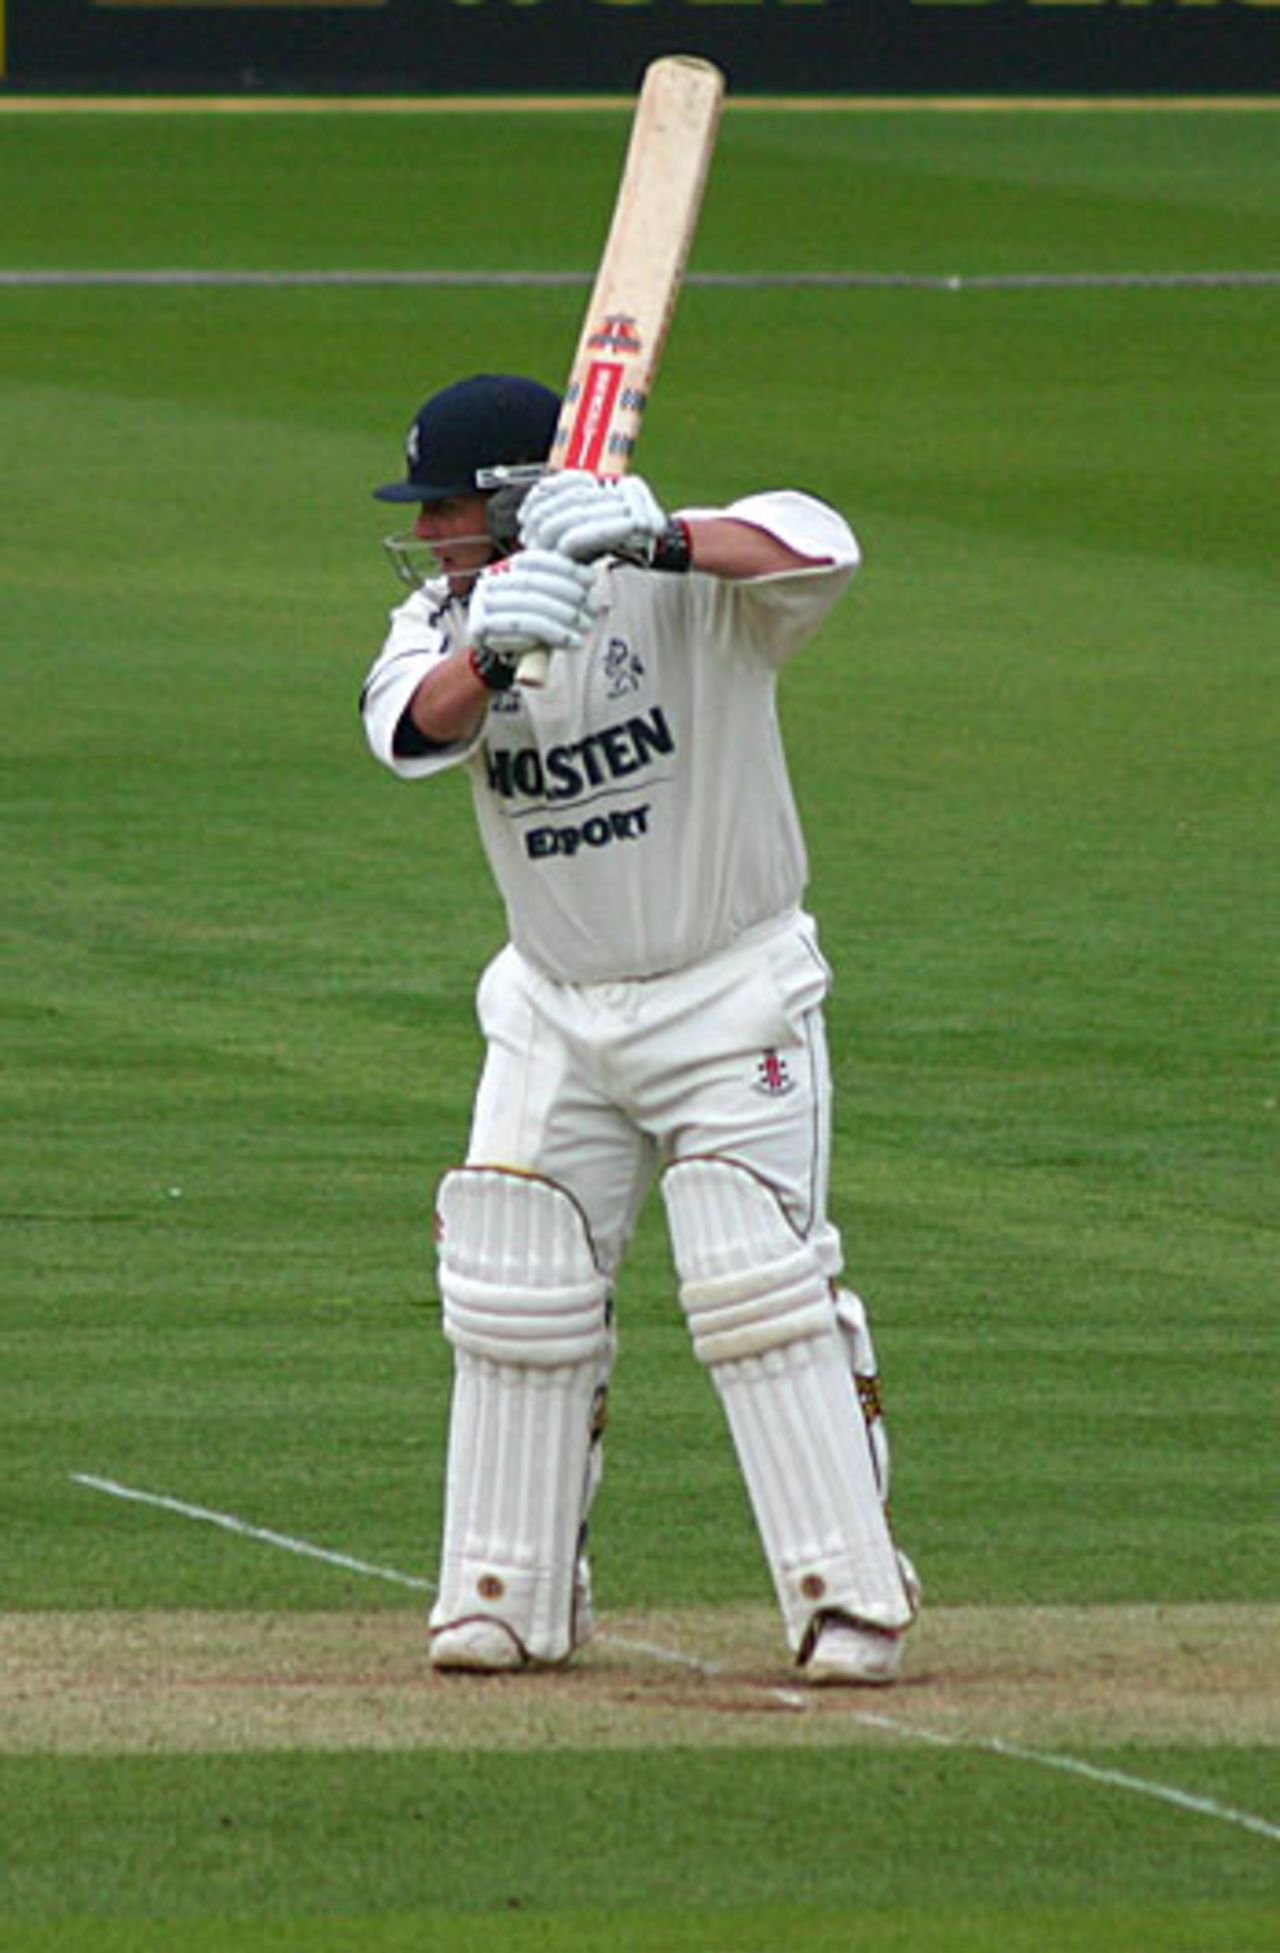 Matthew Walker is watchful after making a century against Middlesex, Middlesex v Kent, County Championship, Lord's, April 27, 2006